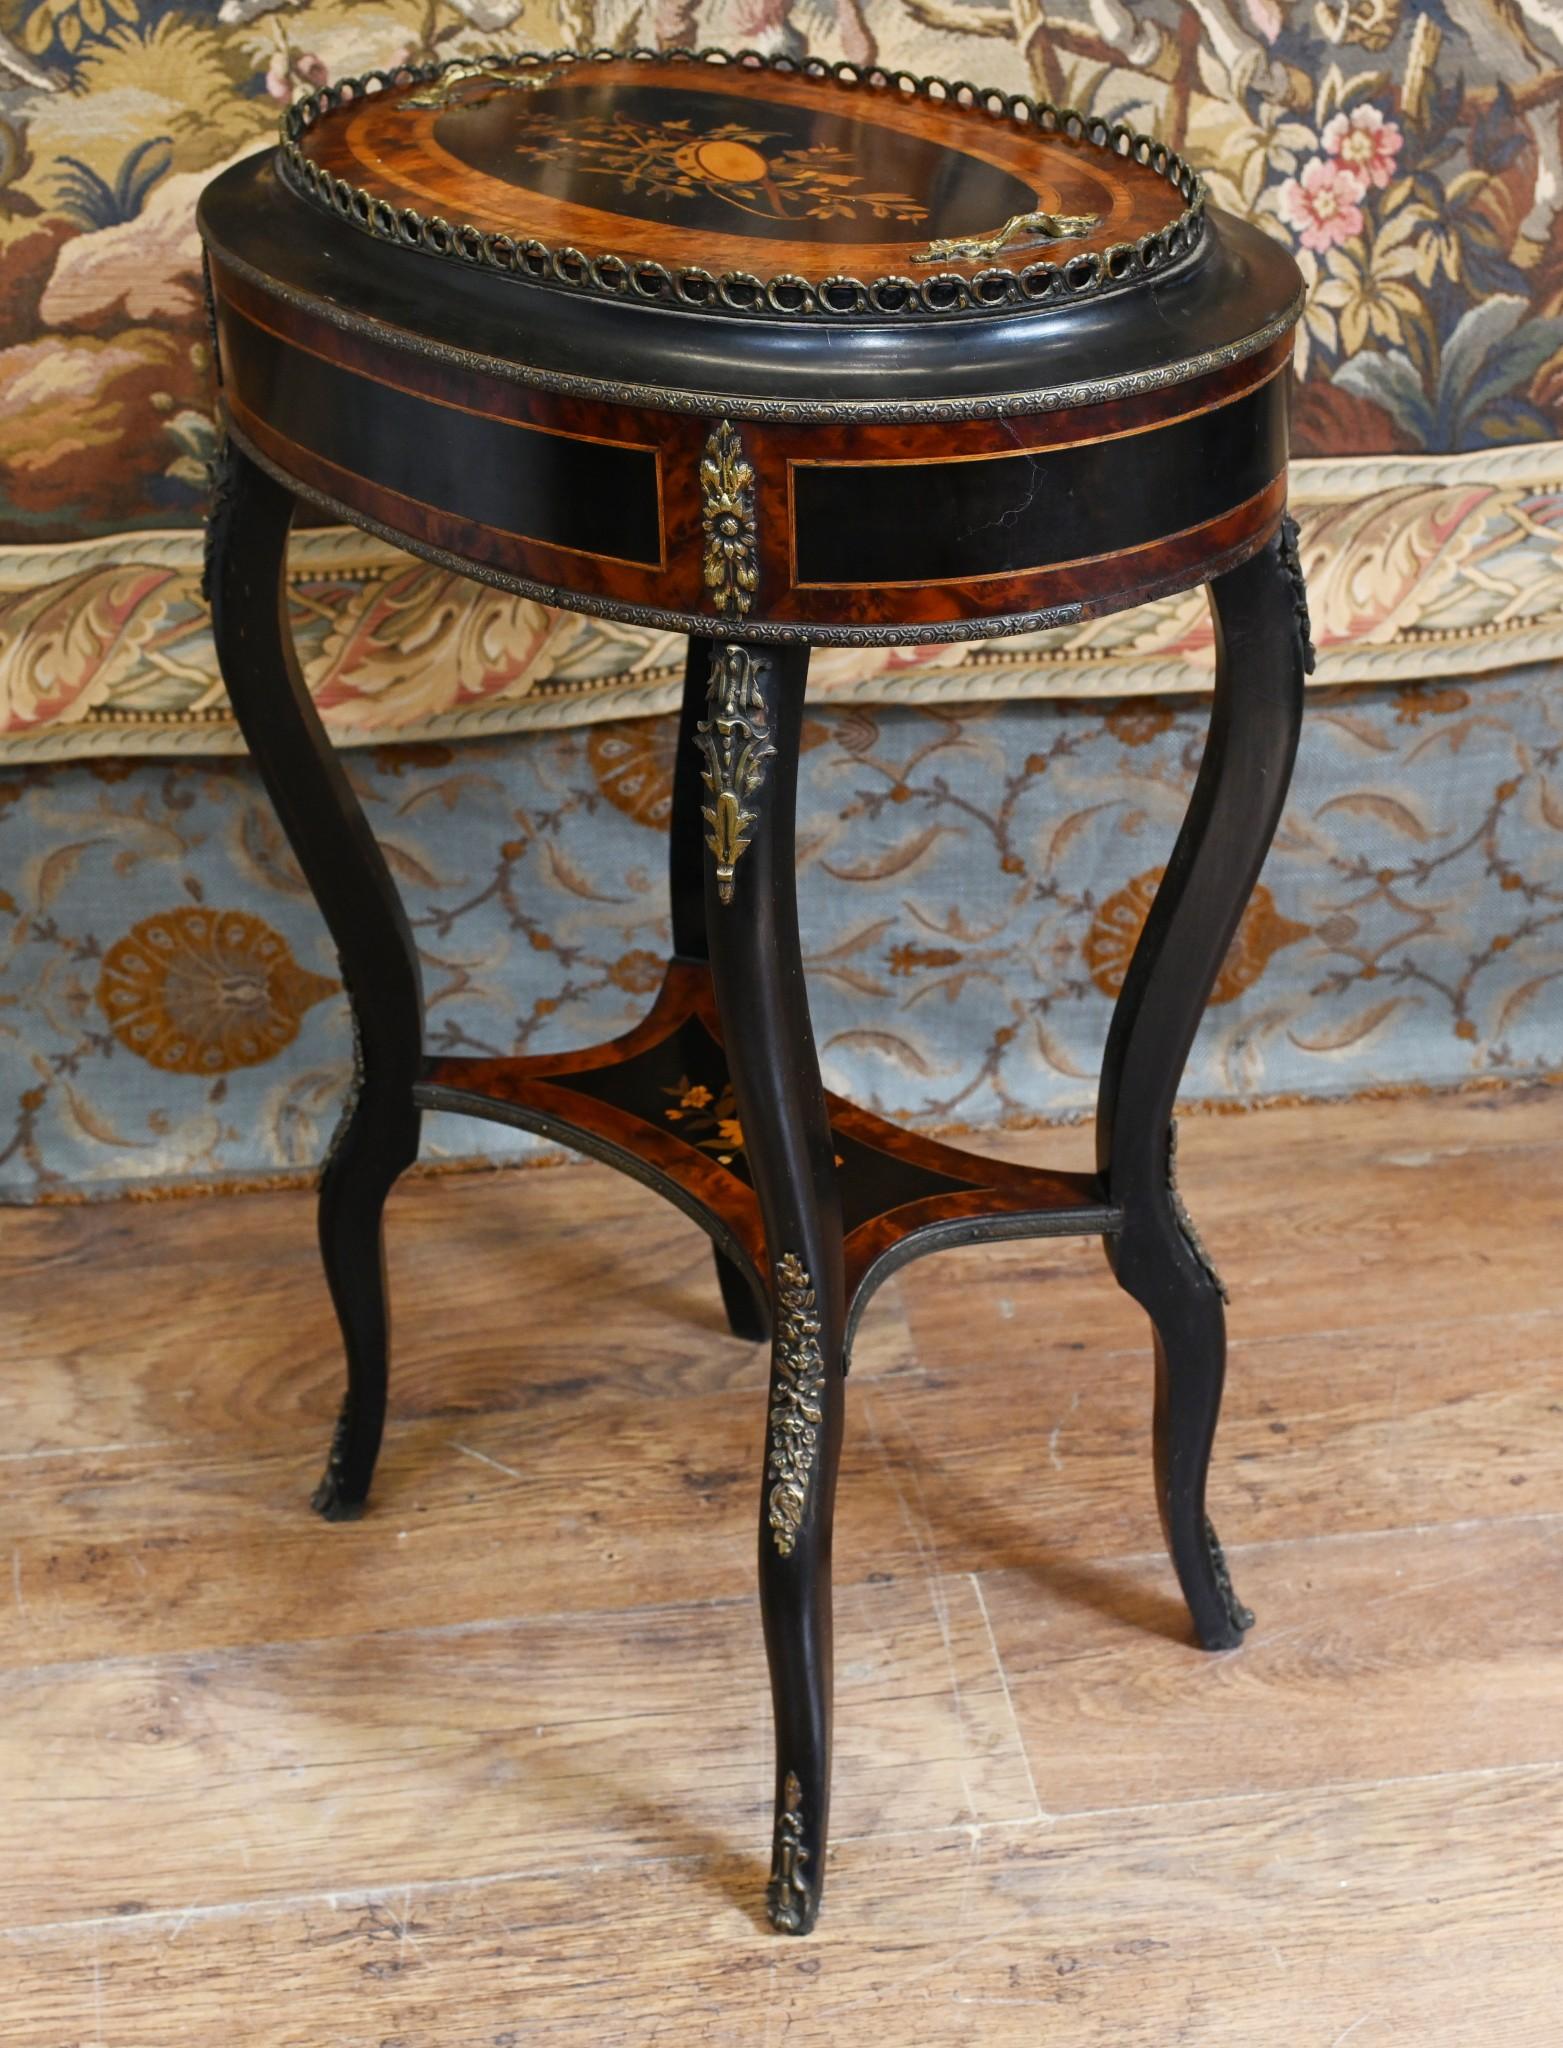 Wood Antique French Planter Side Table Aboyna Inlay Jardiniere For Sale